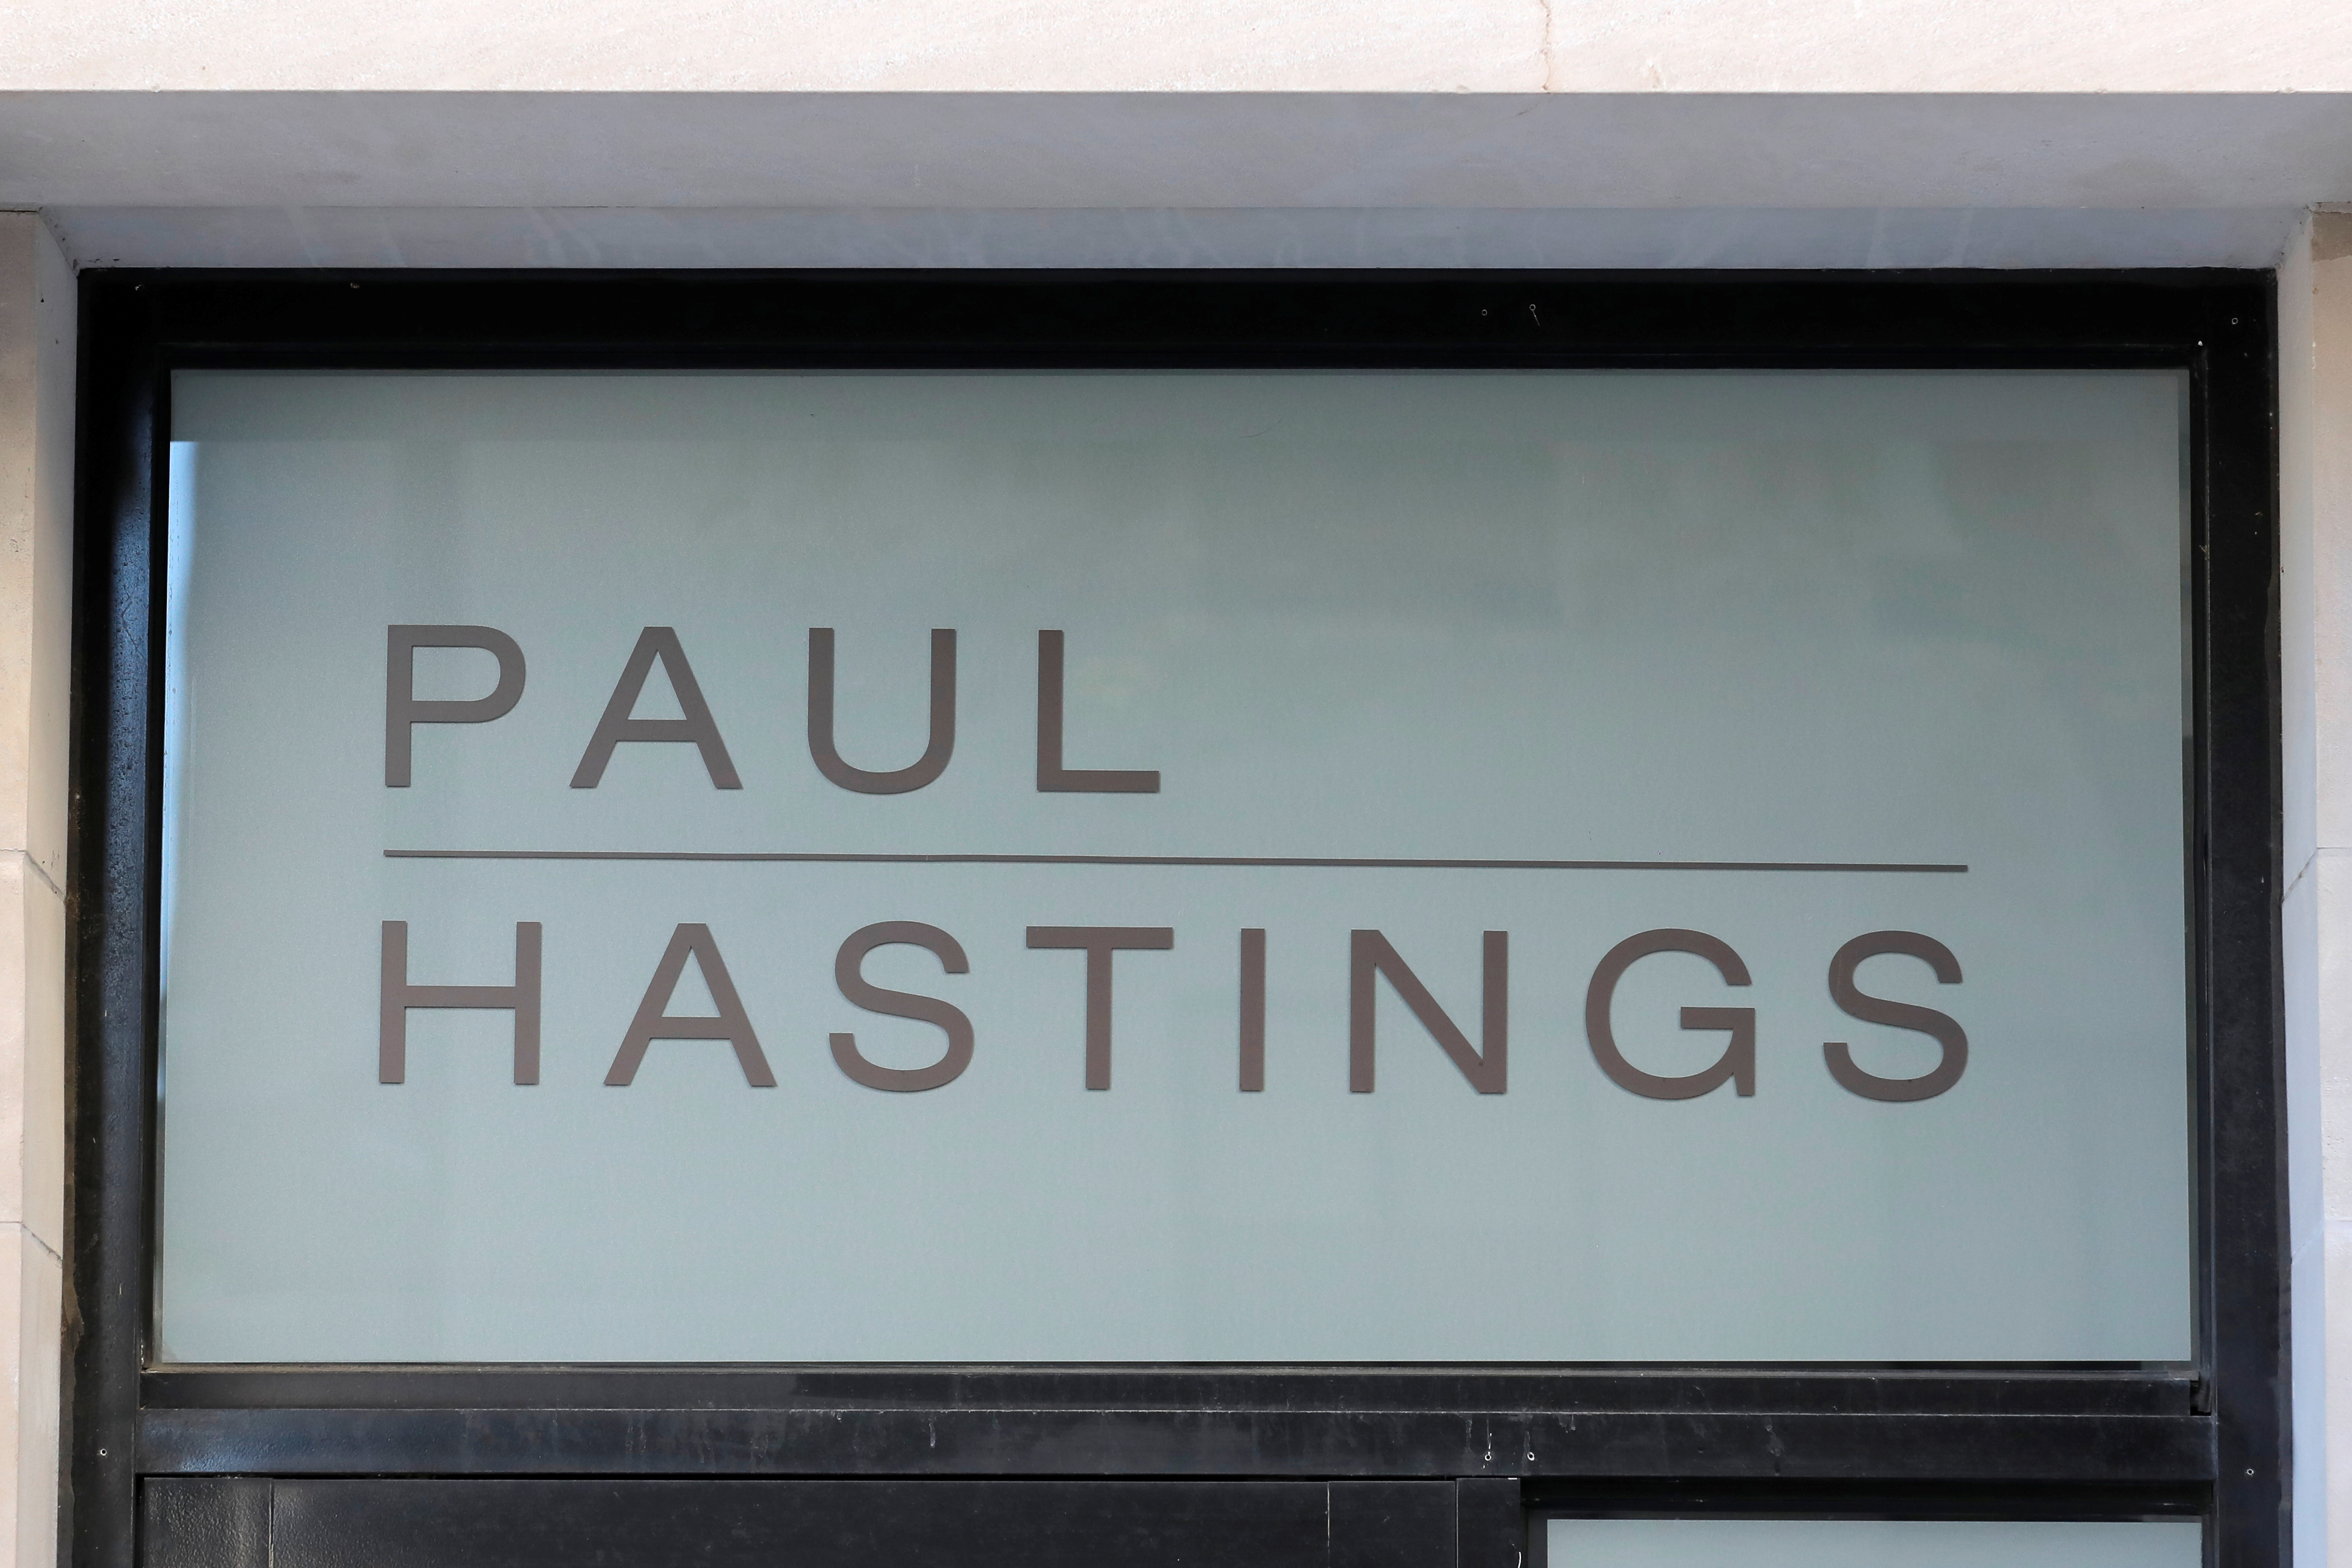 Signage is seen outside of the Paul Hastings law firm in Washington, D.C.